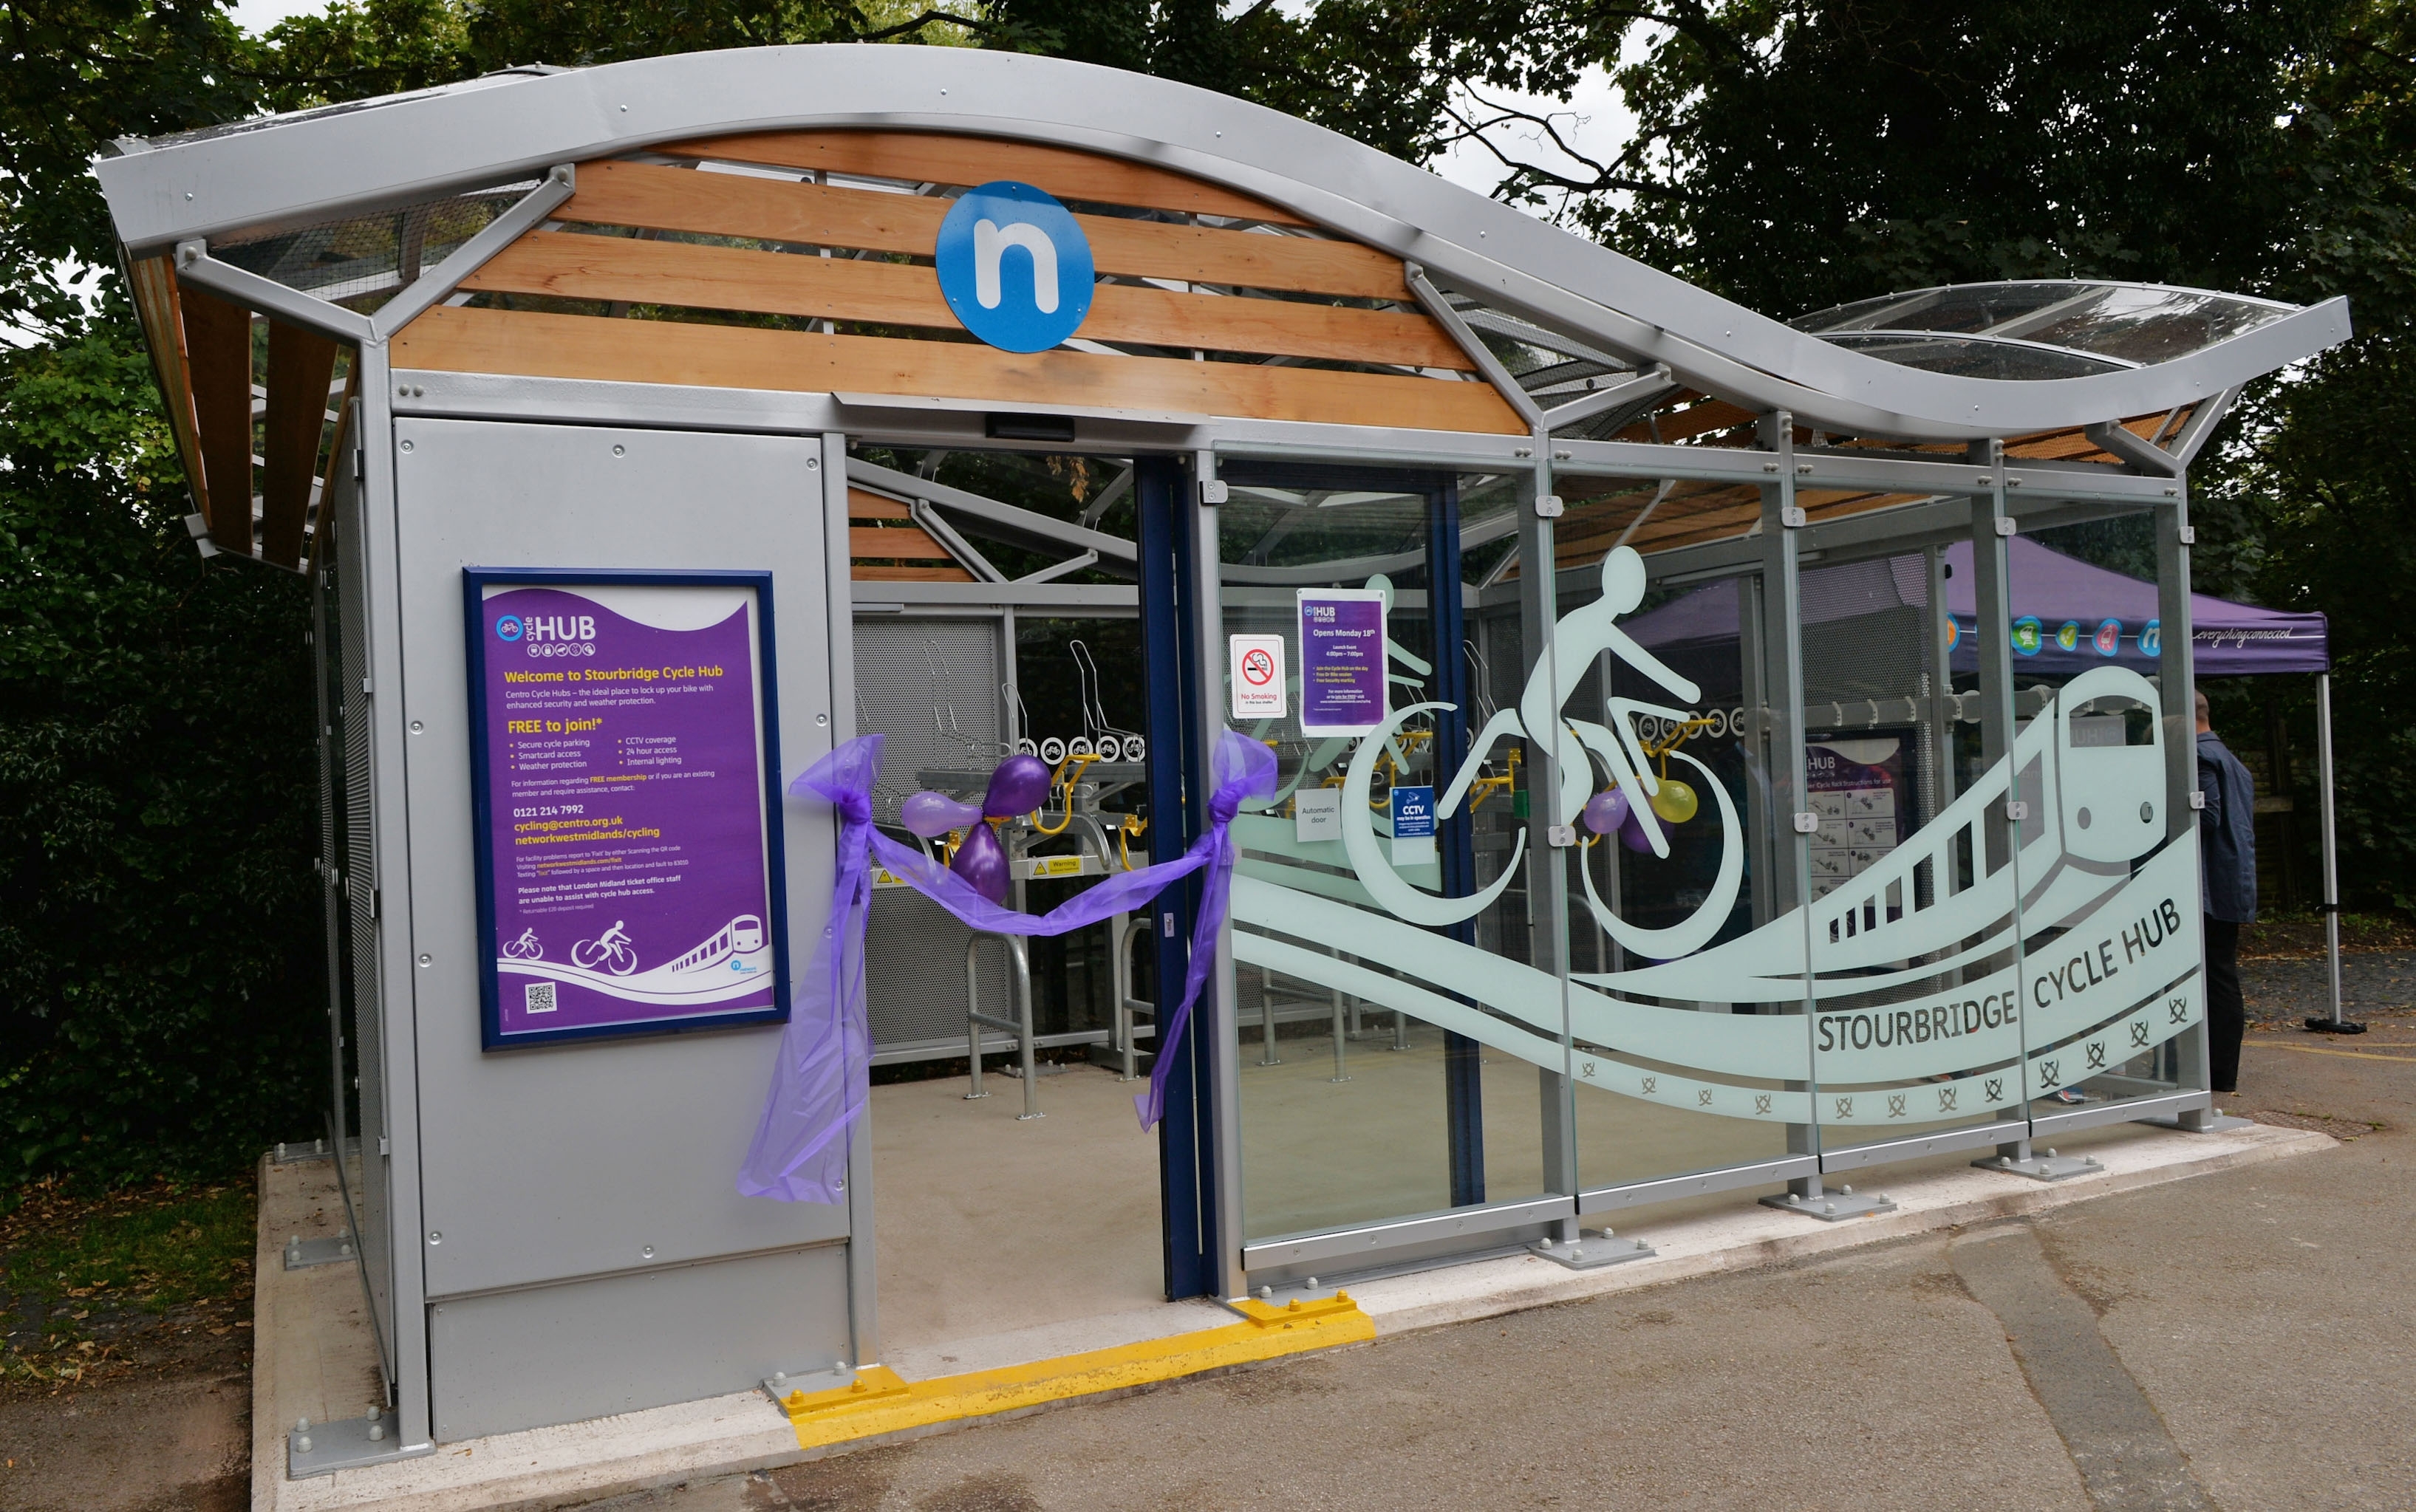 A building like this "cycle hub" in England is being considered for Elgin